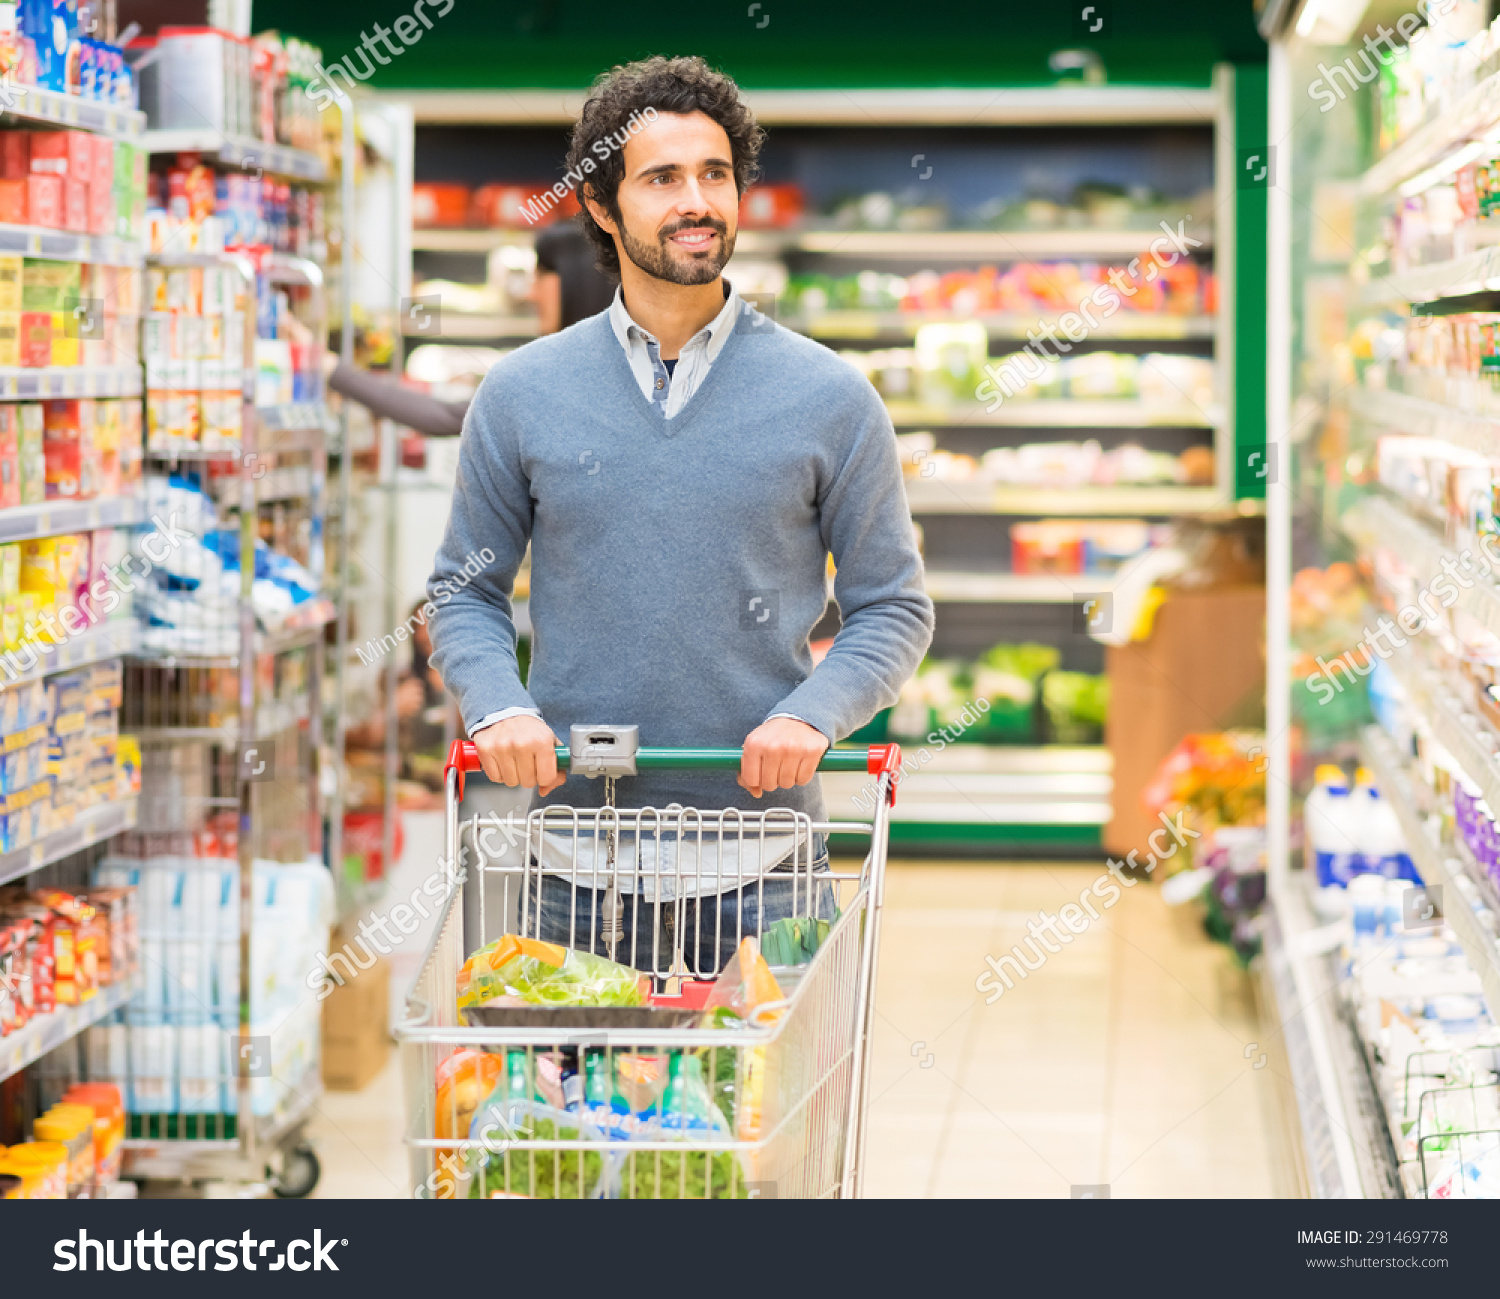 Smiling Woman Shopping In A Supermarket Stock Photo 291469778 ...